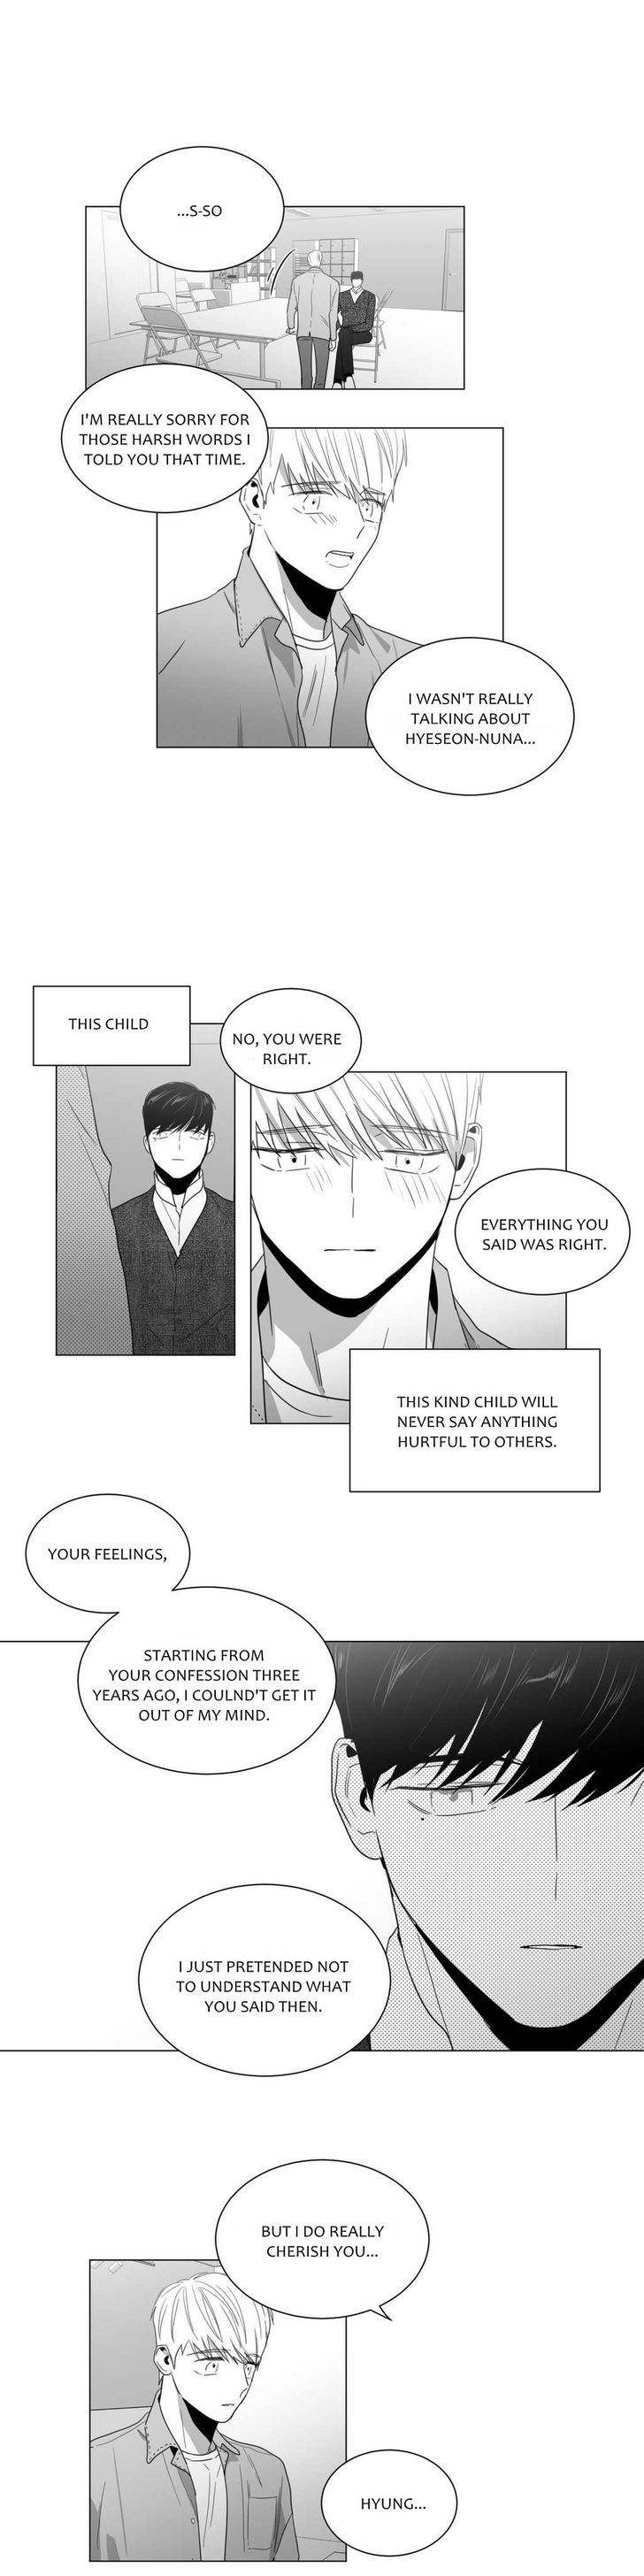 Lover Boy (Lezhin) Chapter 014 page 10